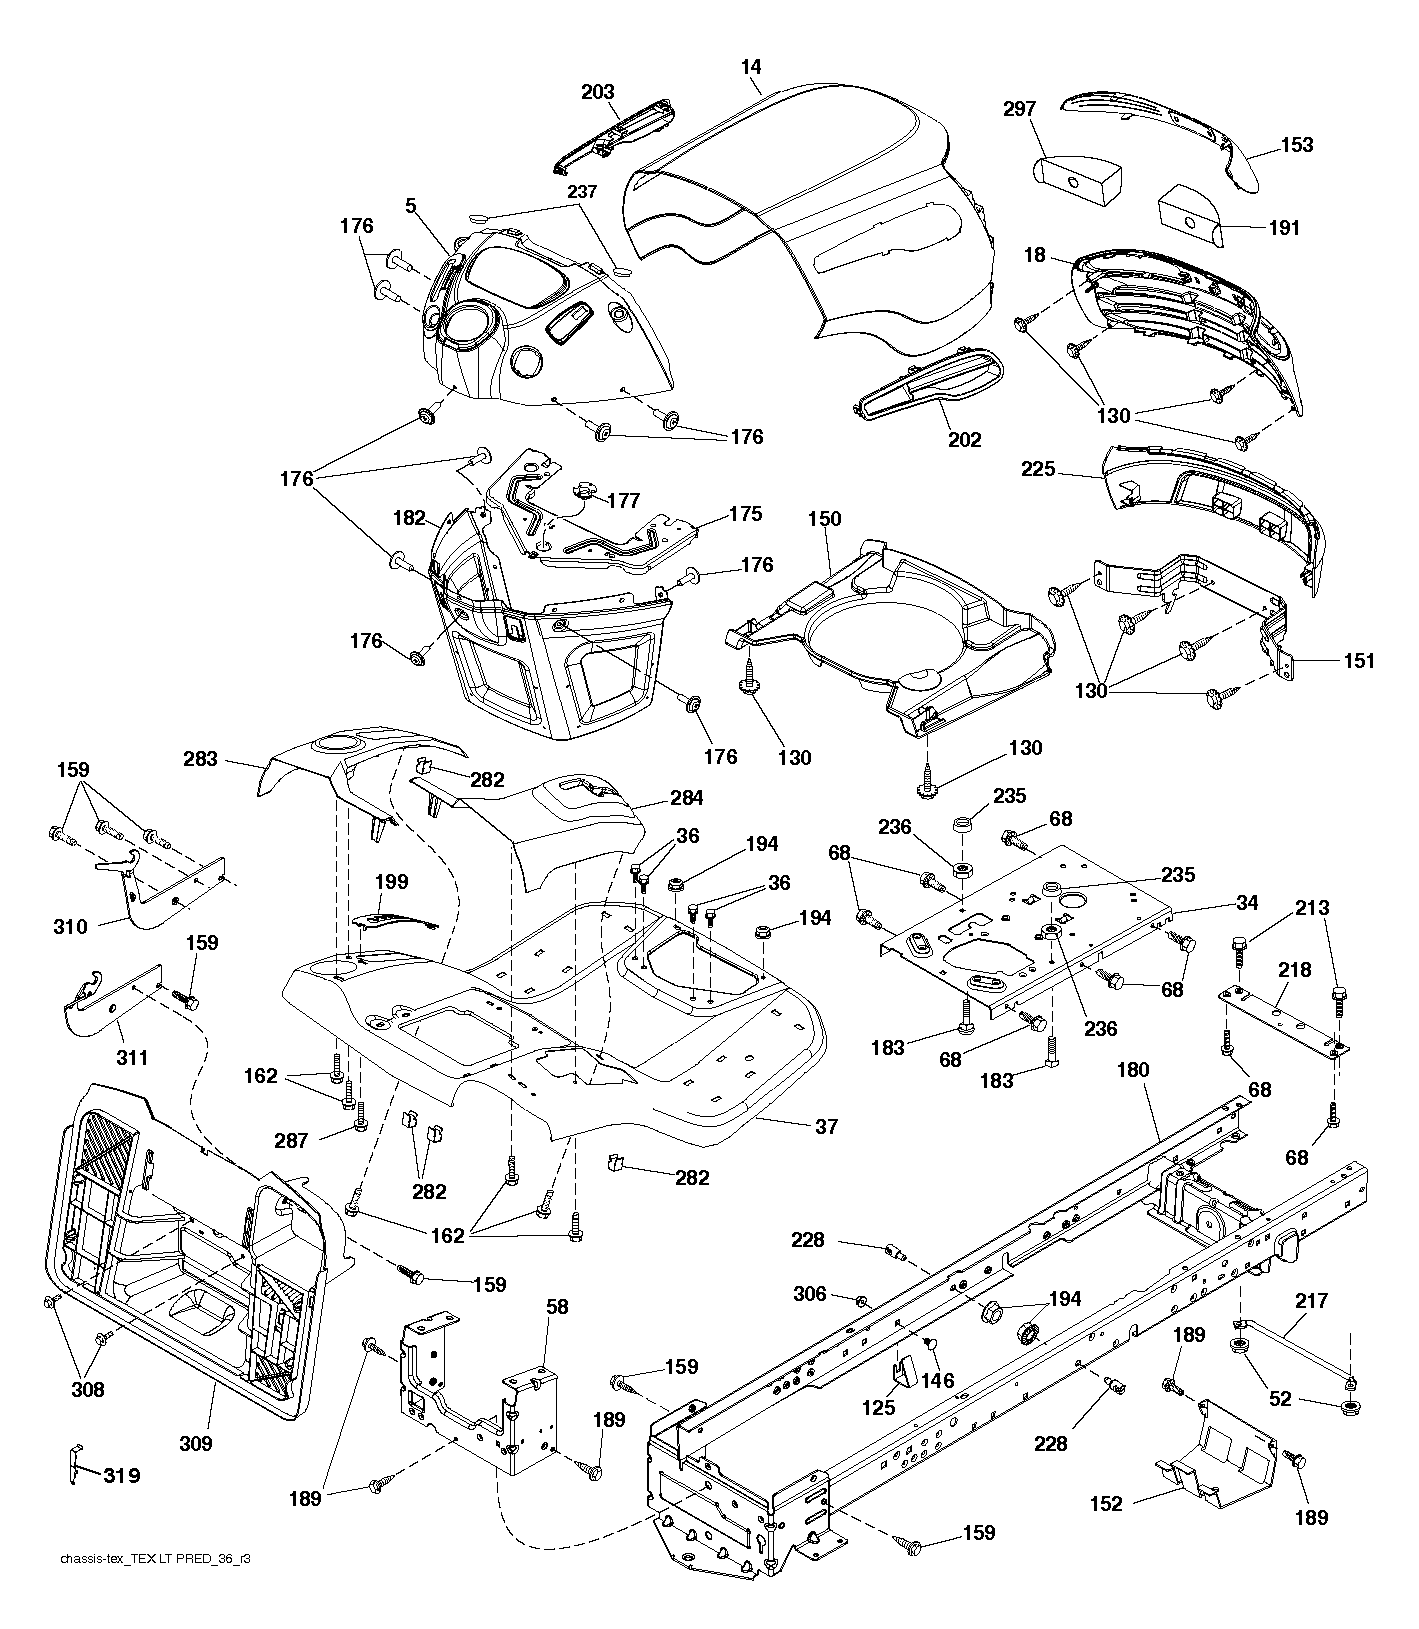 Chassis and appendix 532425772, 532441287, 532426511, 532196125, 596030701, 532441339, 596040501, 532412280, 596030701, 581684801, 596321701, 581857901, 532400267, 532187568, 531169901, 532444264, 817000612, 532142432, 532199472, 532400776, 532195228, 597630801, 532407176, 874520520, 532428867, 532416502, 583612701, 583371401, 532424322, 532424323, 596030501, 532409167, 532196395, 532441487, 593824001, 532406129, 873930500, 532403704, 532414110, 532440361, 532440528, 817600406, 532401827, 532409149, 532171877, 532430246, 532446636, 532446637, 532174662